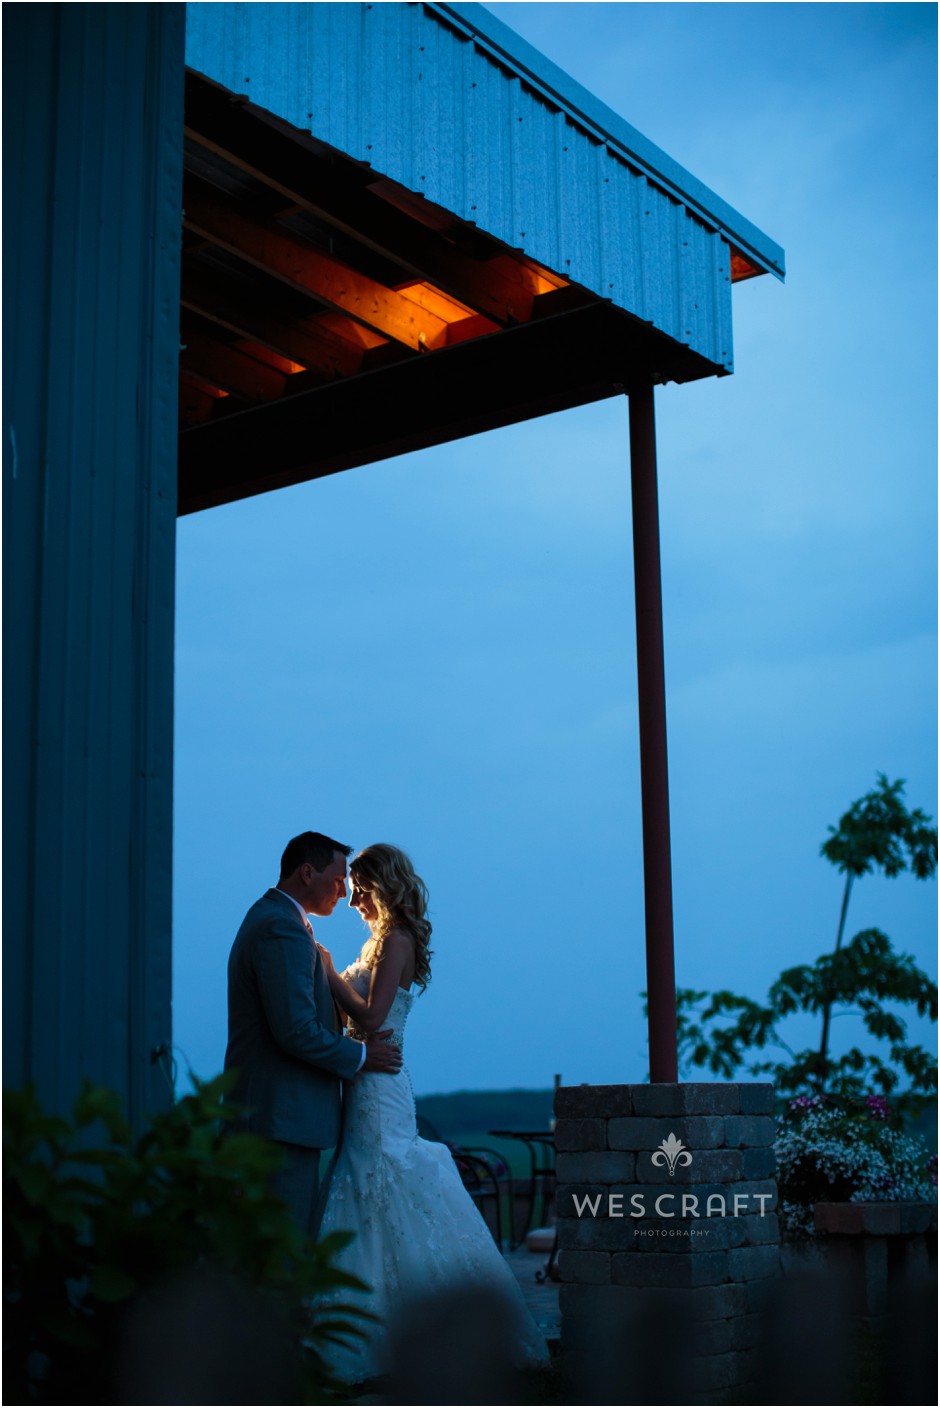 Emerson Creek Pottery & Tearoom Wedding Photography by Wes Craft